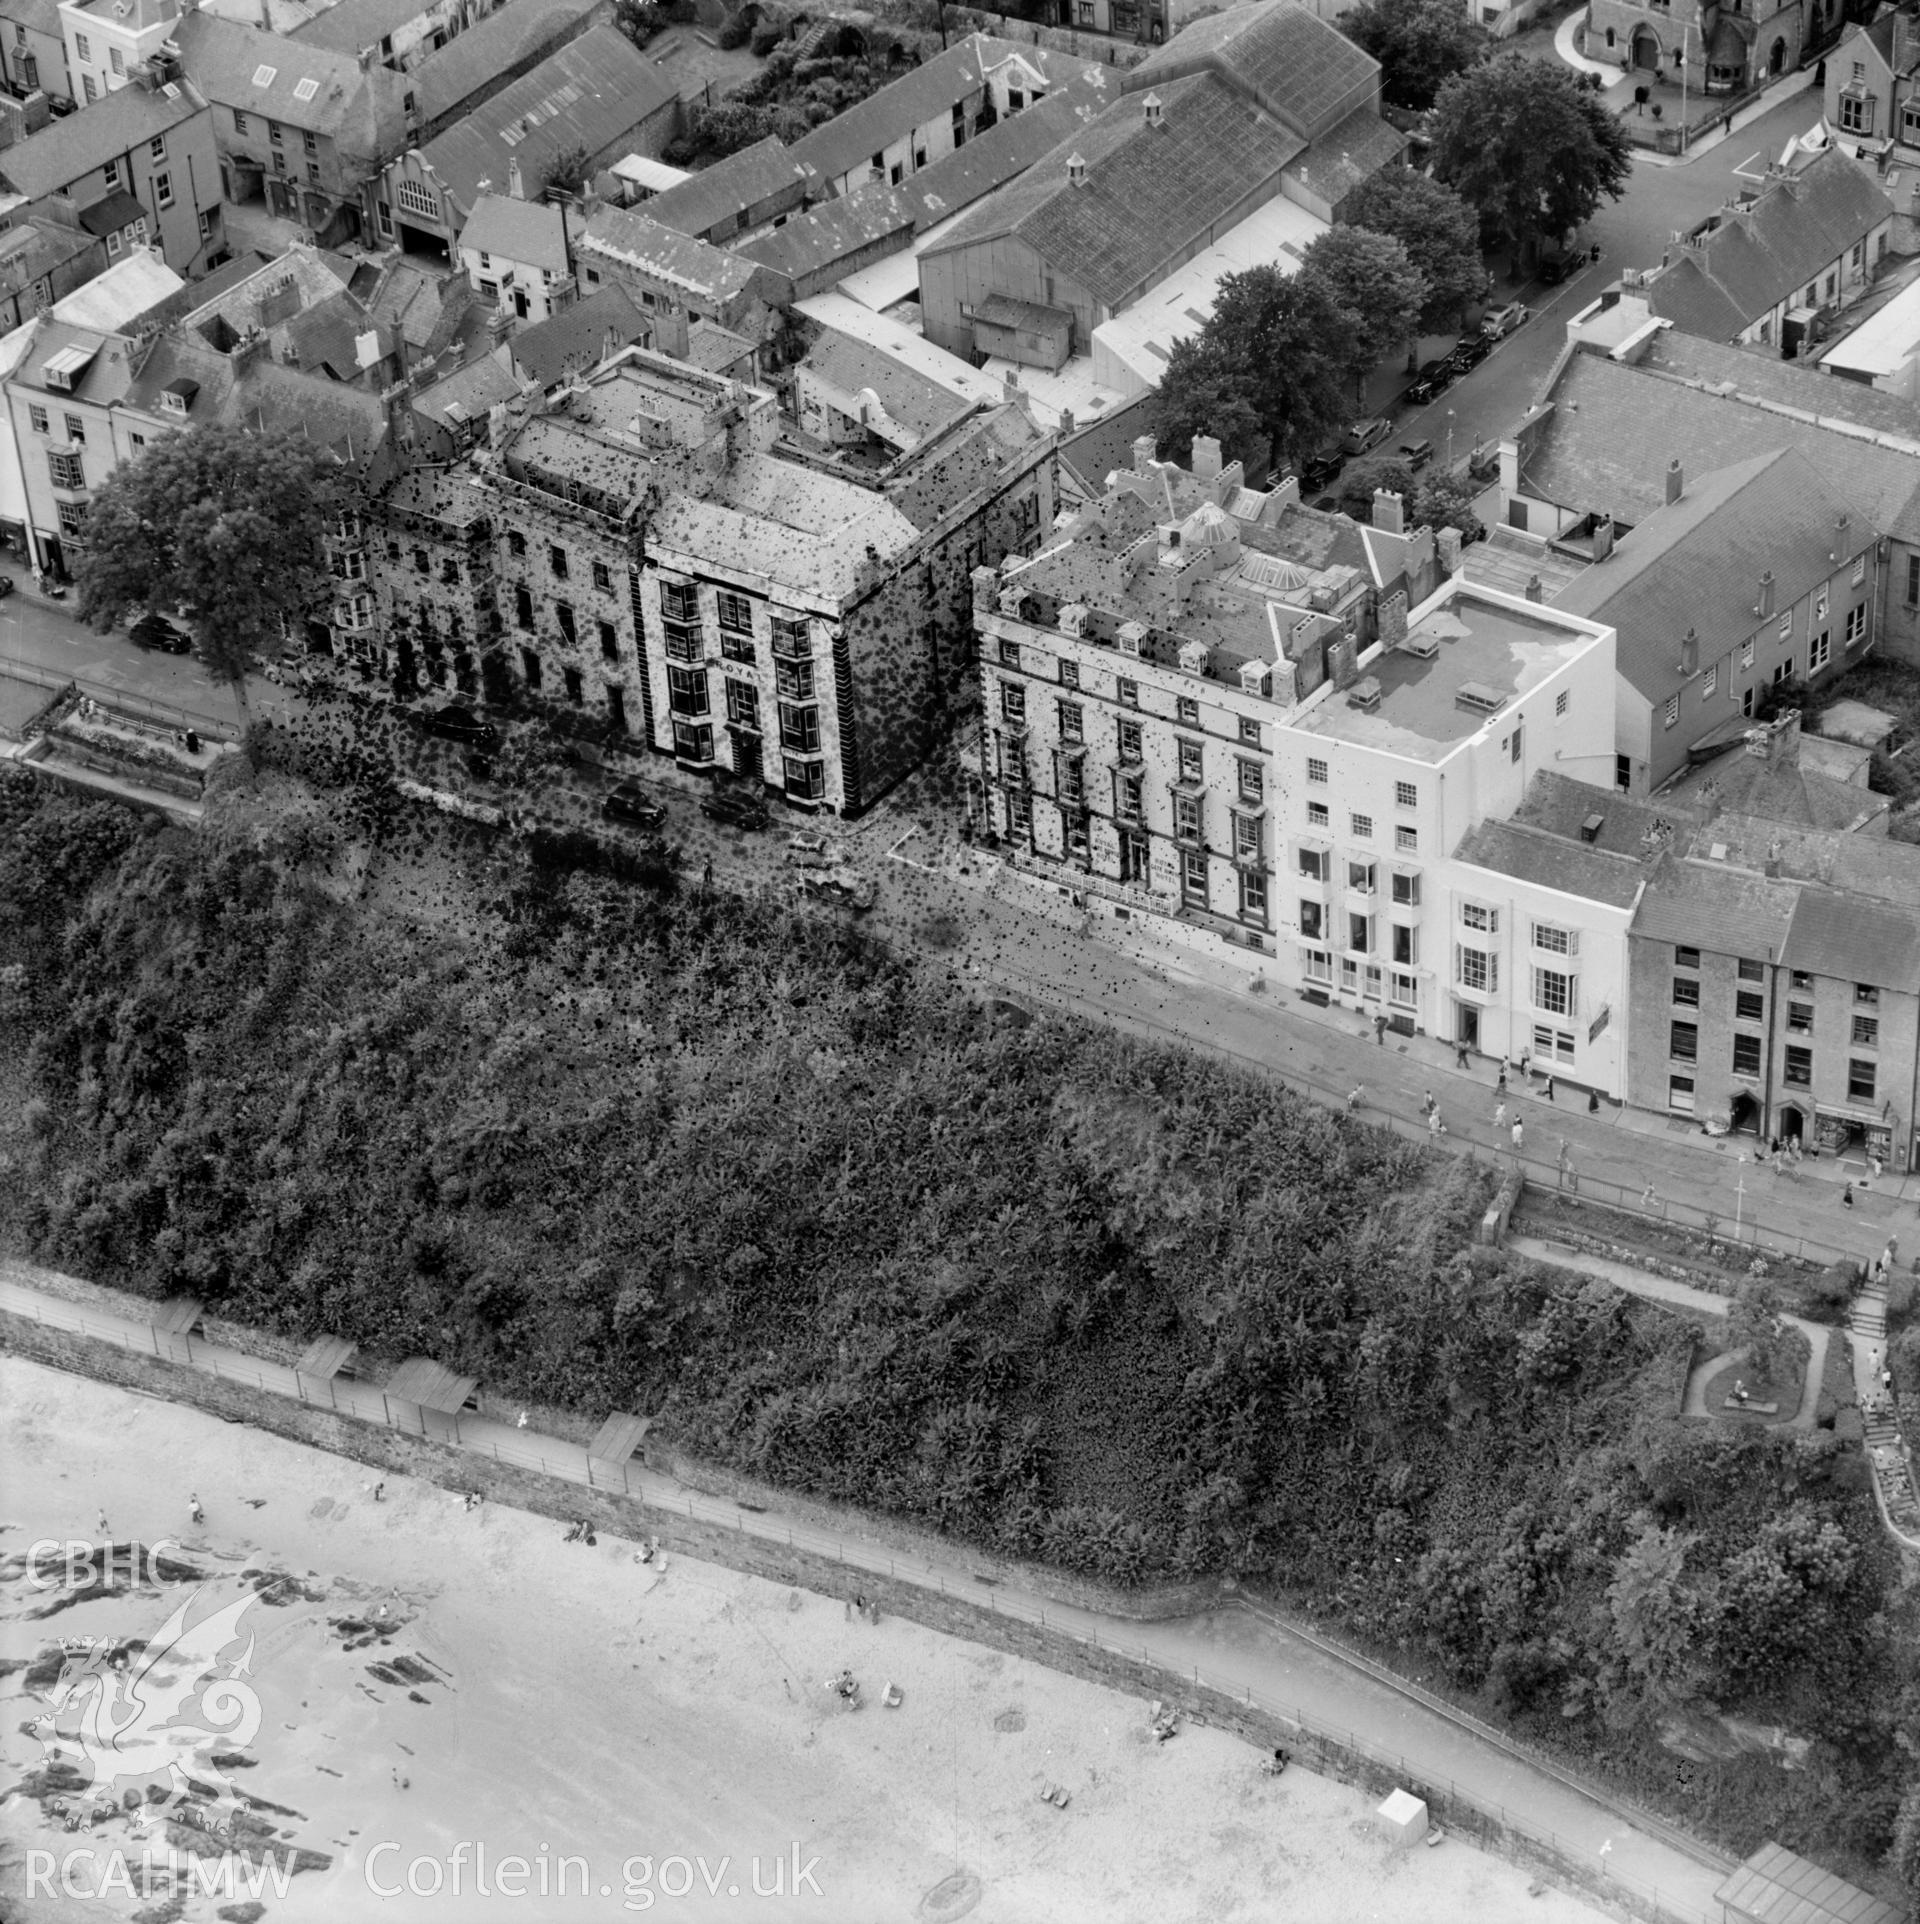 View of the Royal Gate House Hotel, Tenby